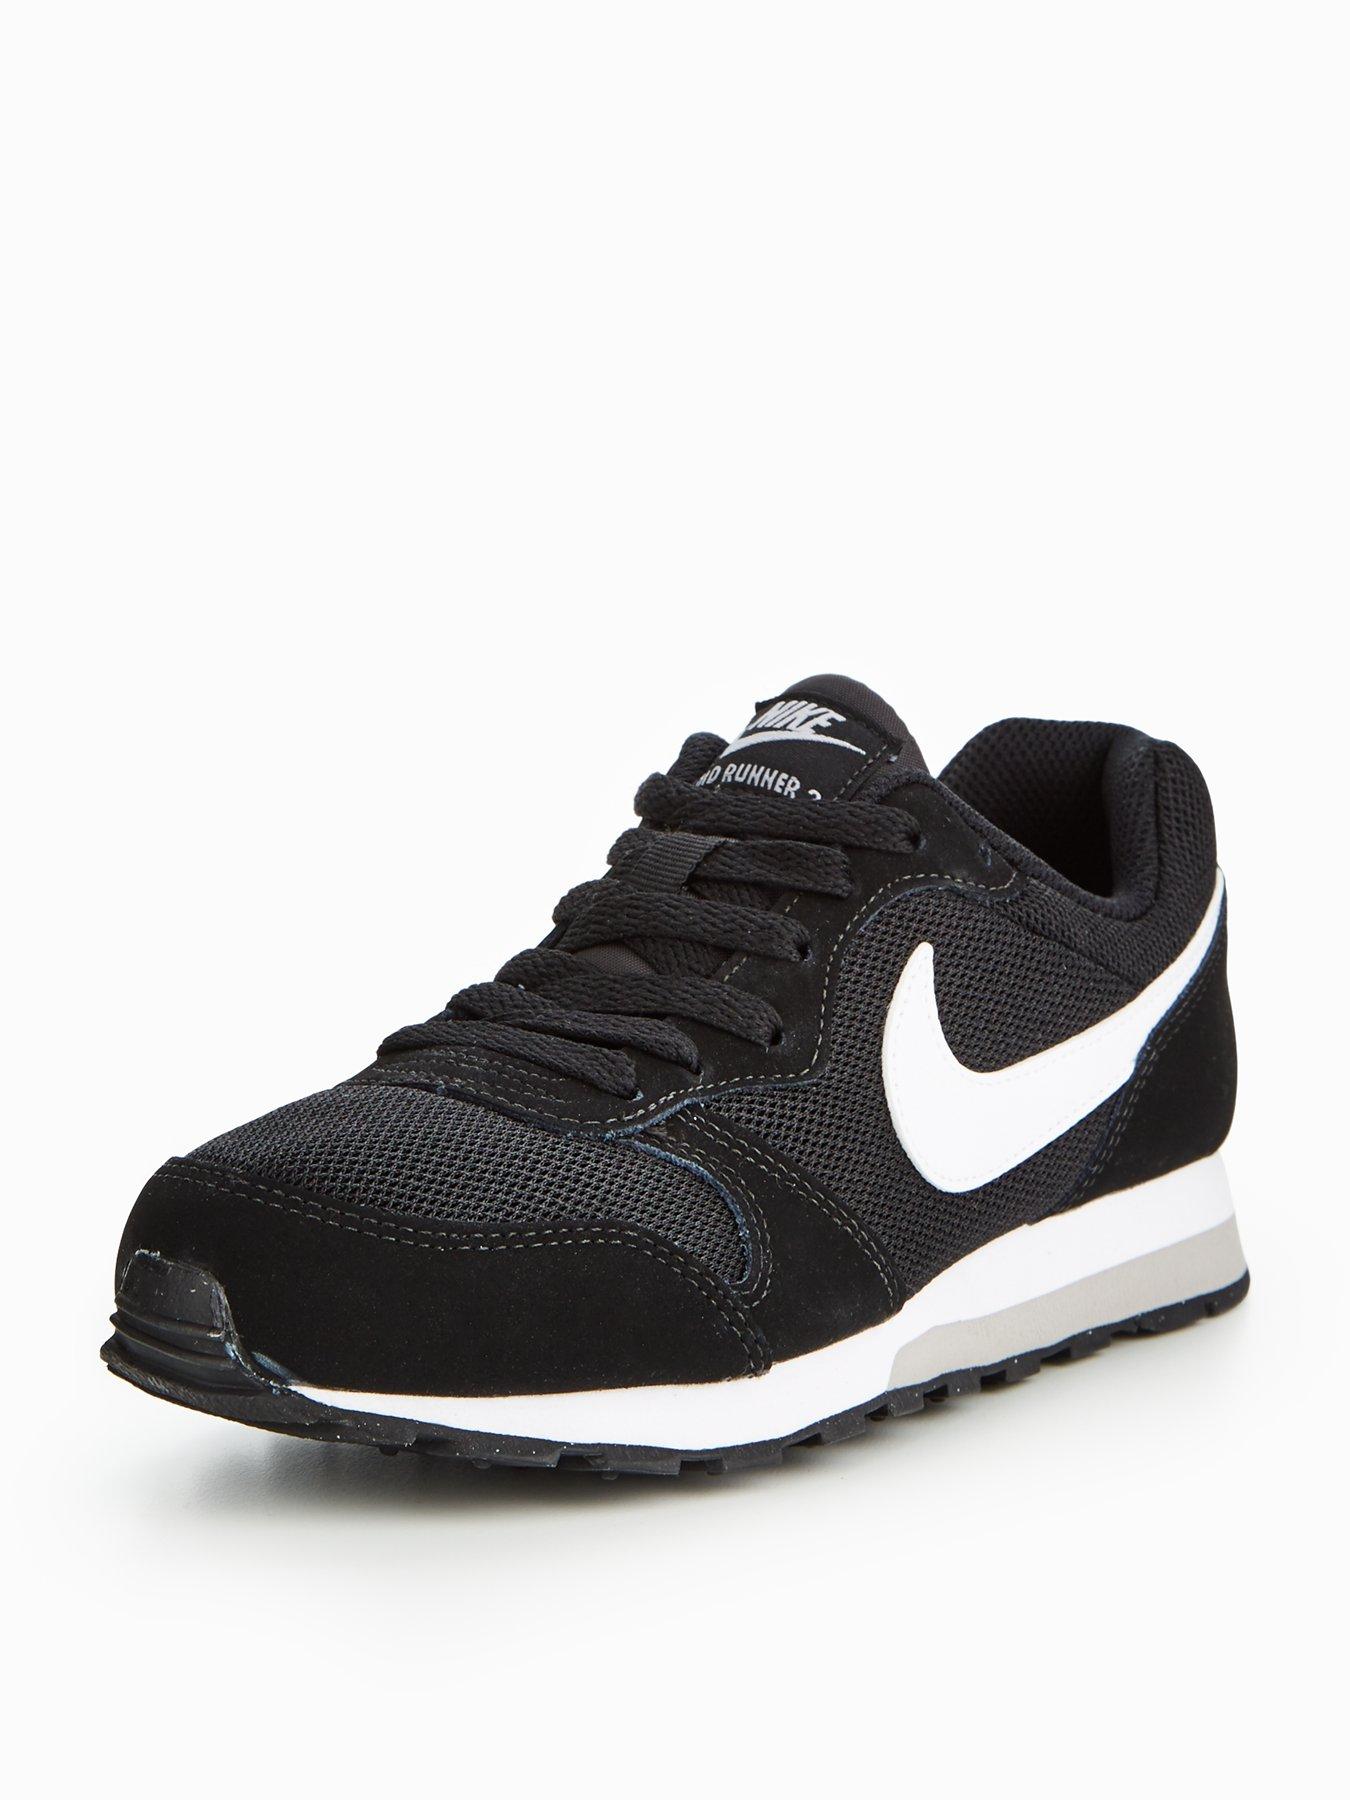 nike md runner 219 casual shoes